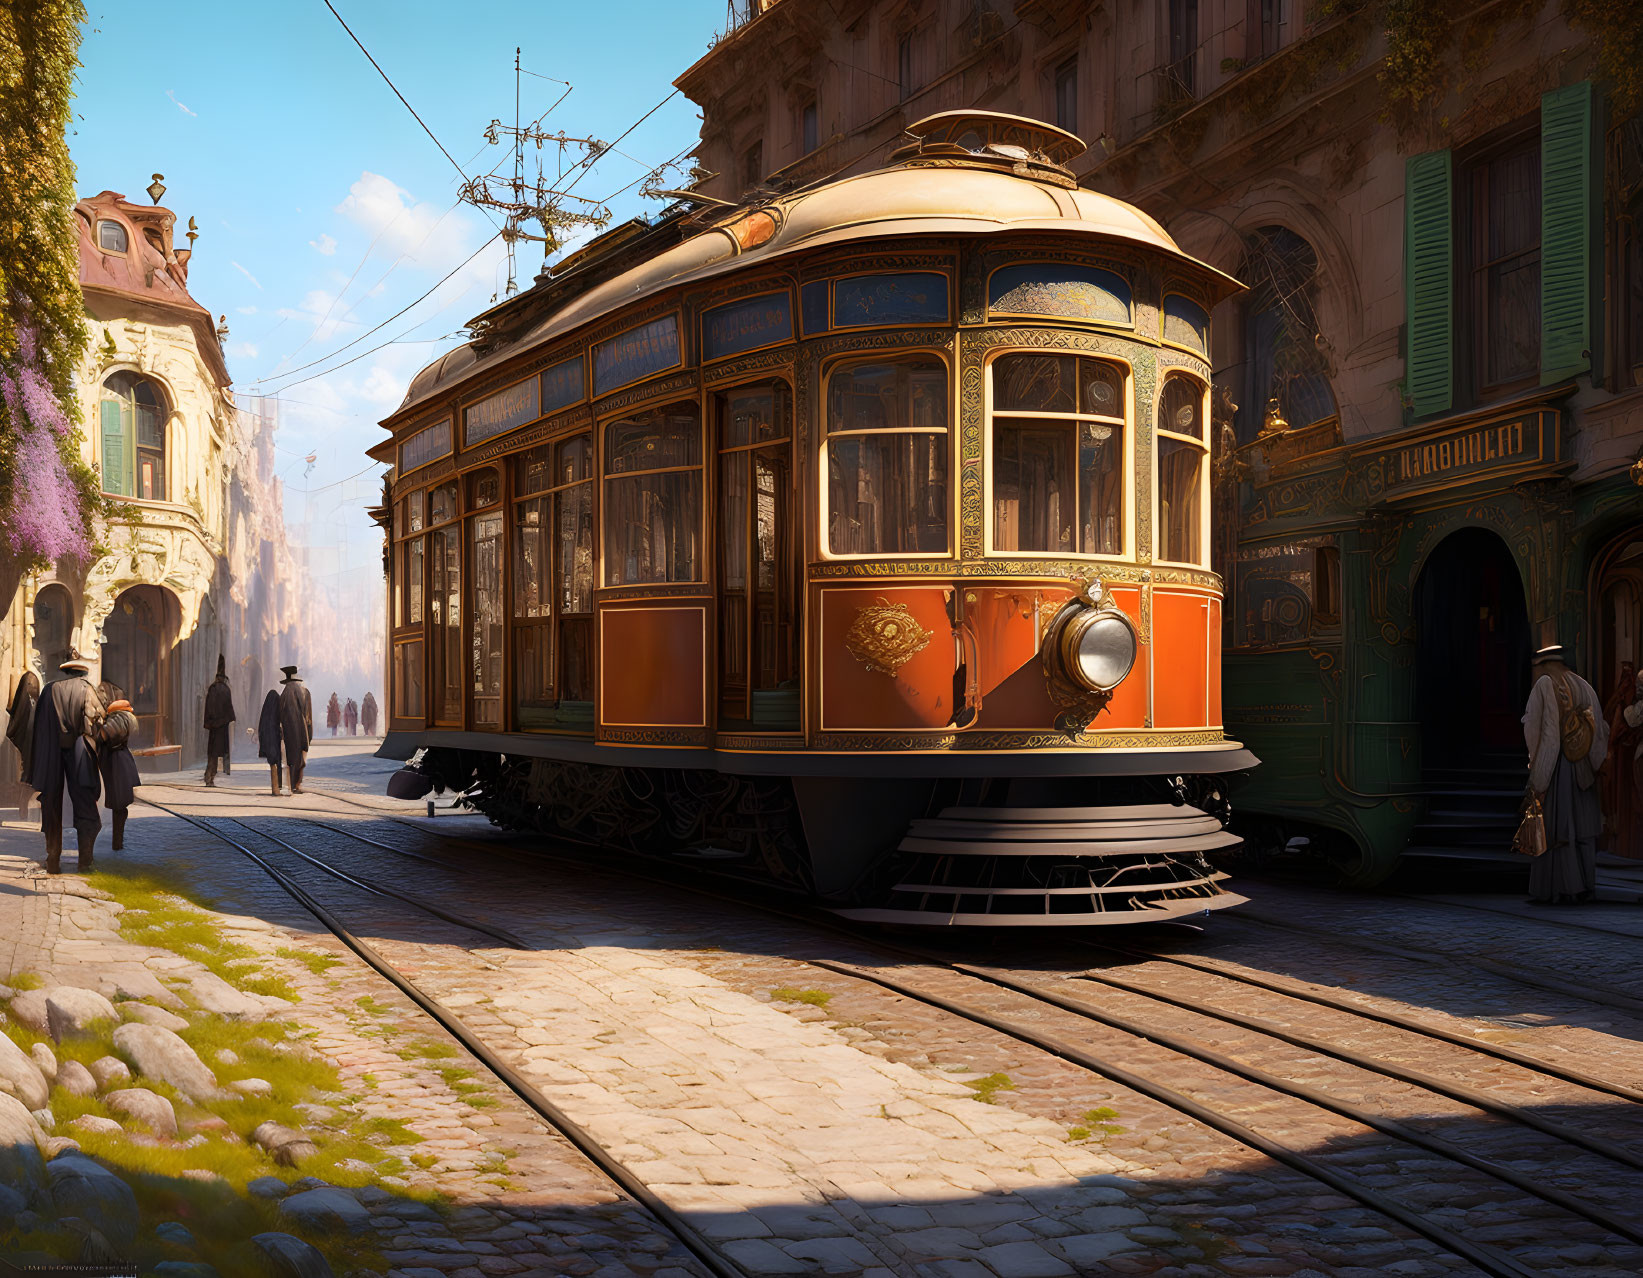 an old tram in the streets of the city